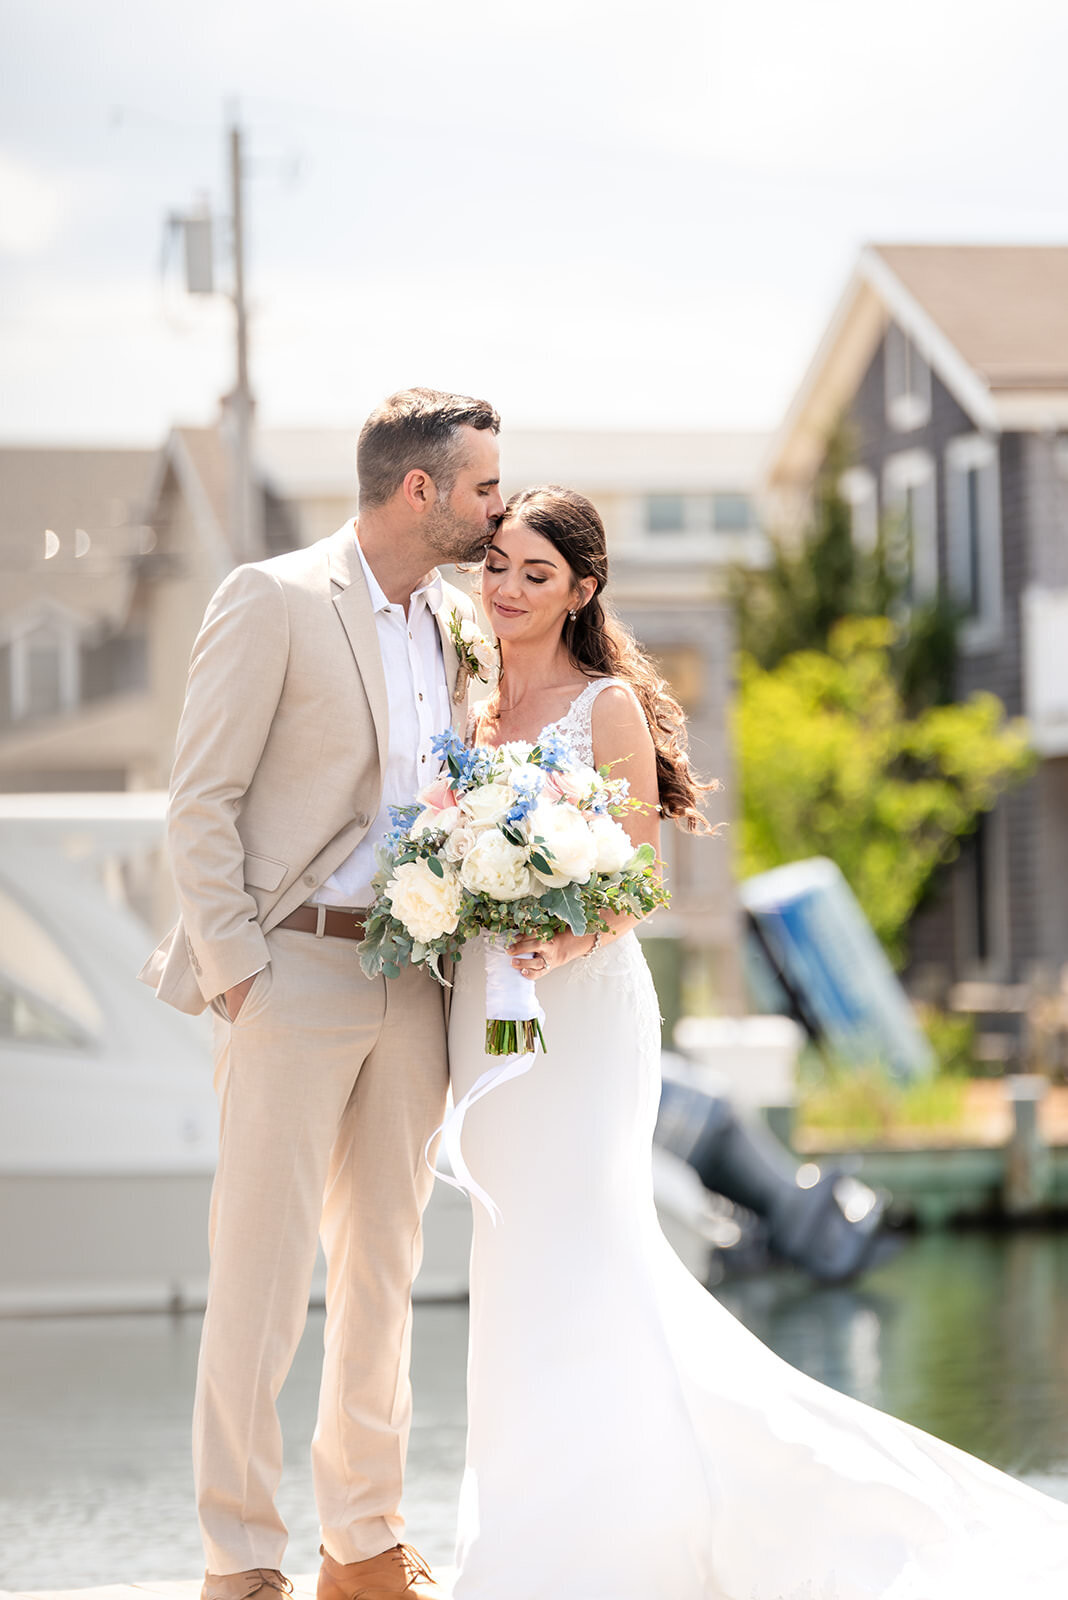 The couple stands close together on a dock, with the groom kissing the bride's forehead while she holds a bouquet of white and blue flowers.